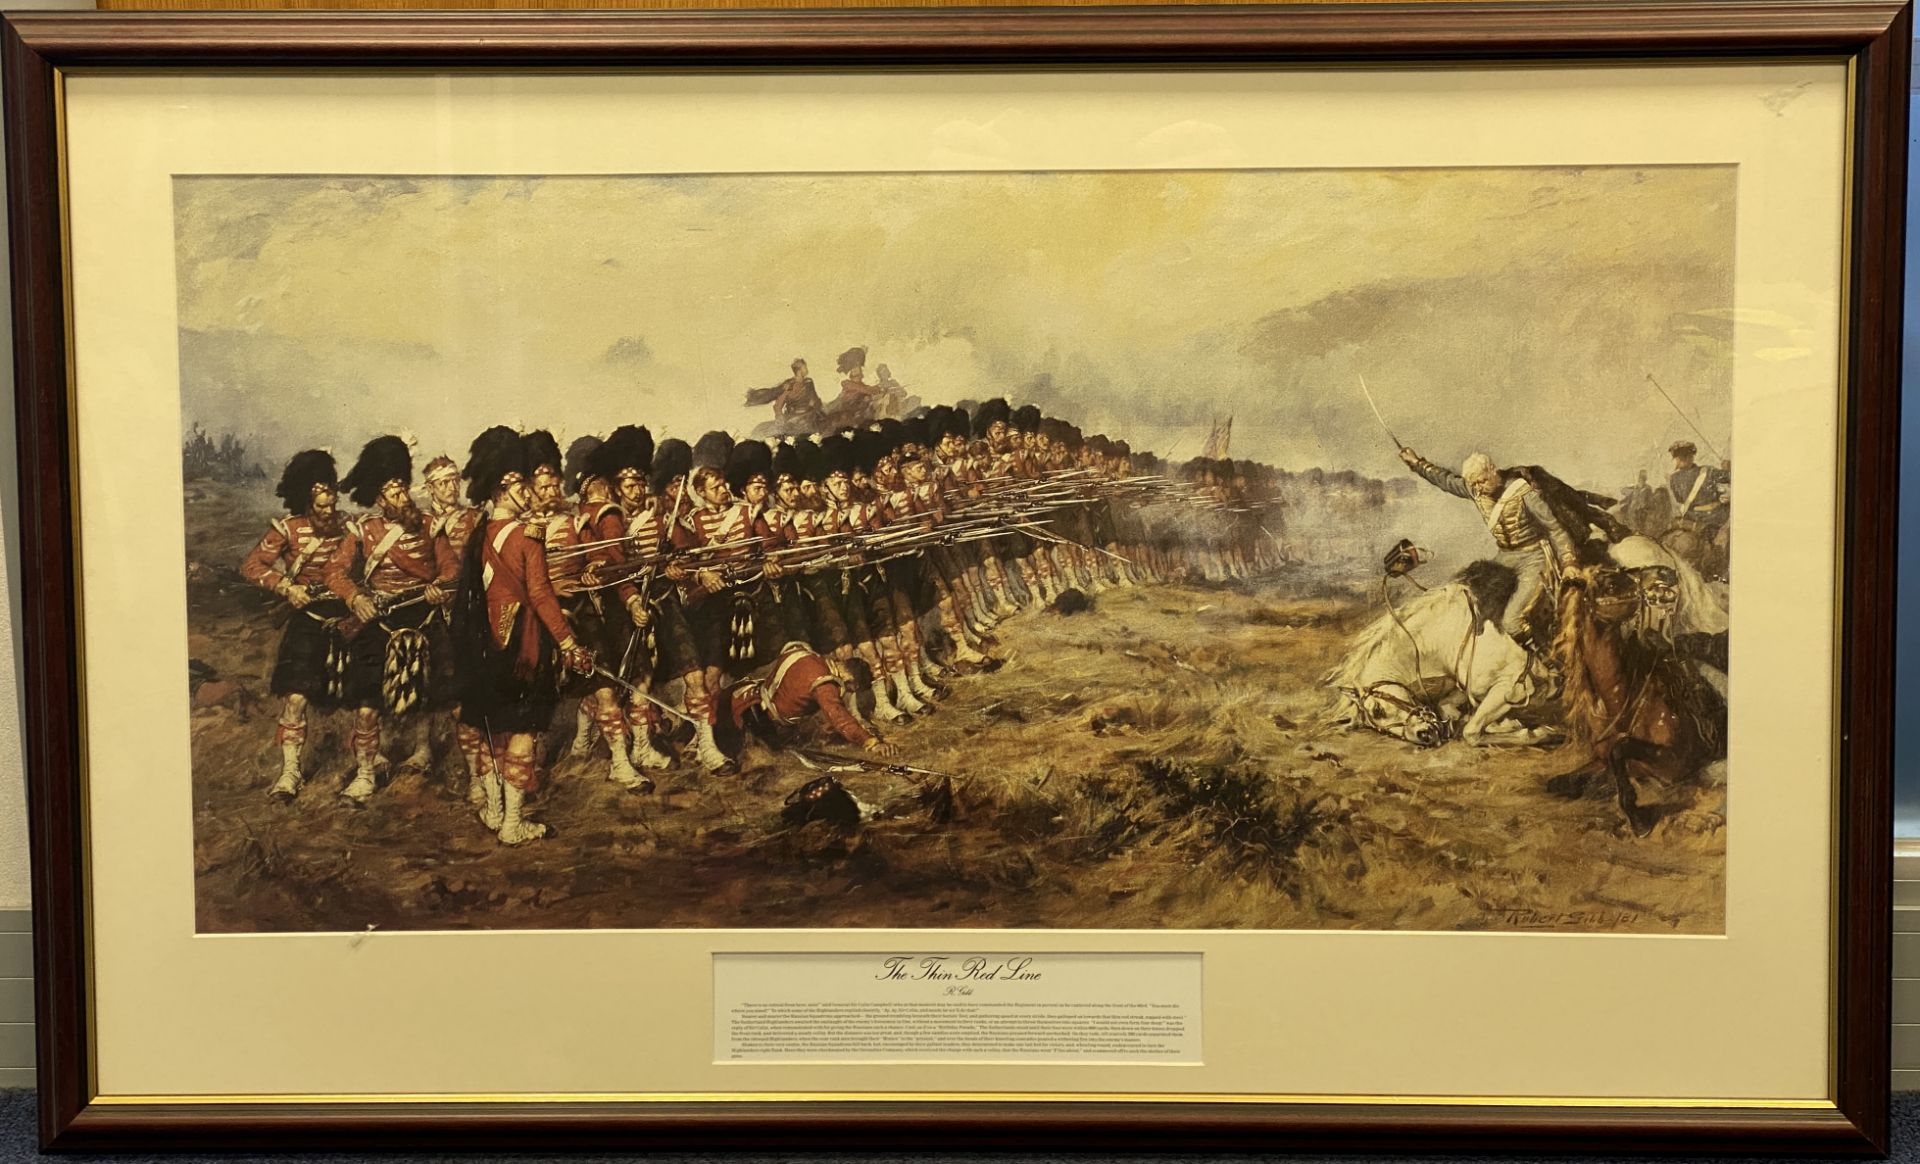 R Gibb large framed print 'The Thin Red Line' - the stand of the Sutherland Highlanders against the